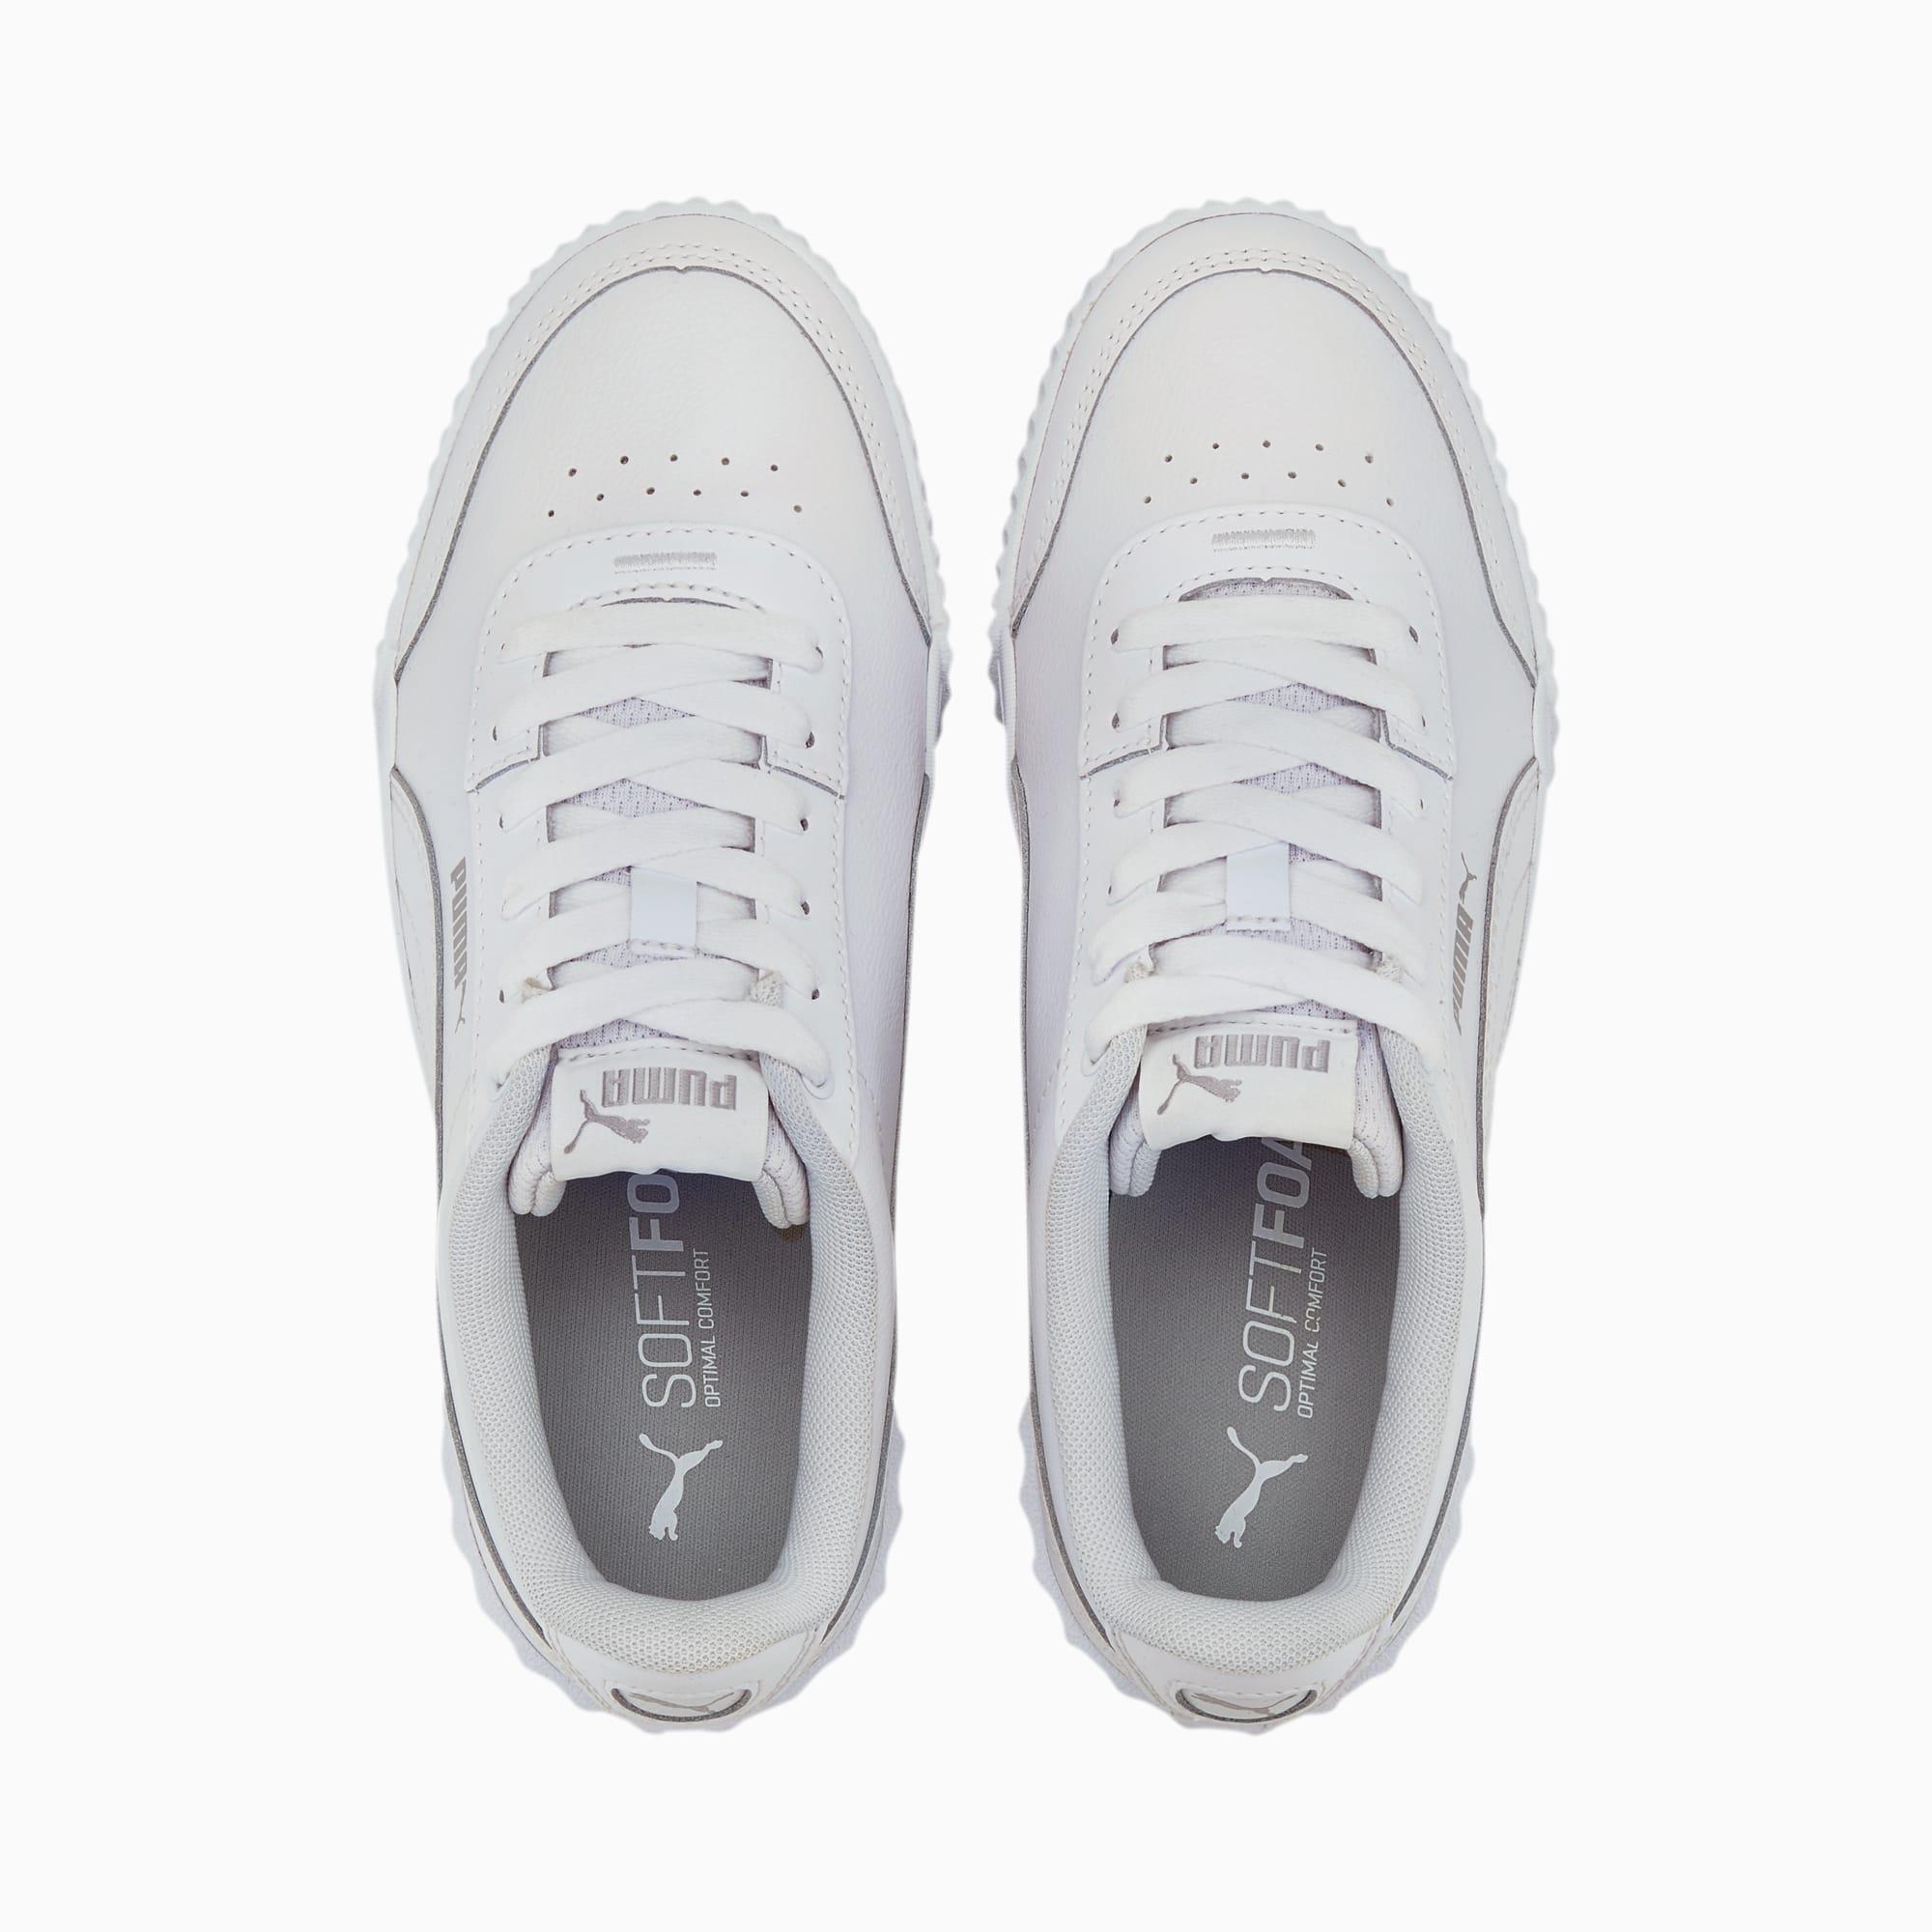 PUMA Synthetic Carina Lift Tw Sneakers in White - Lyst